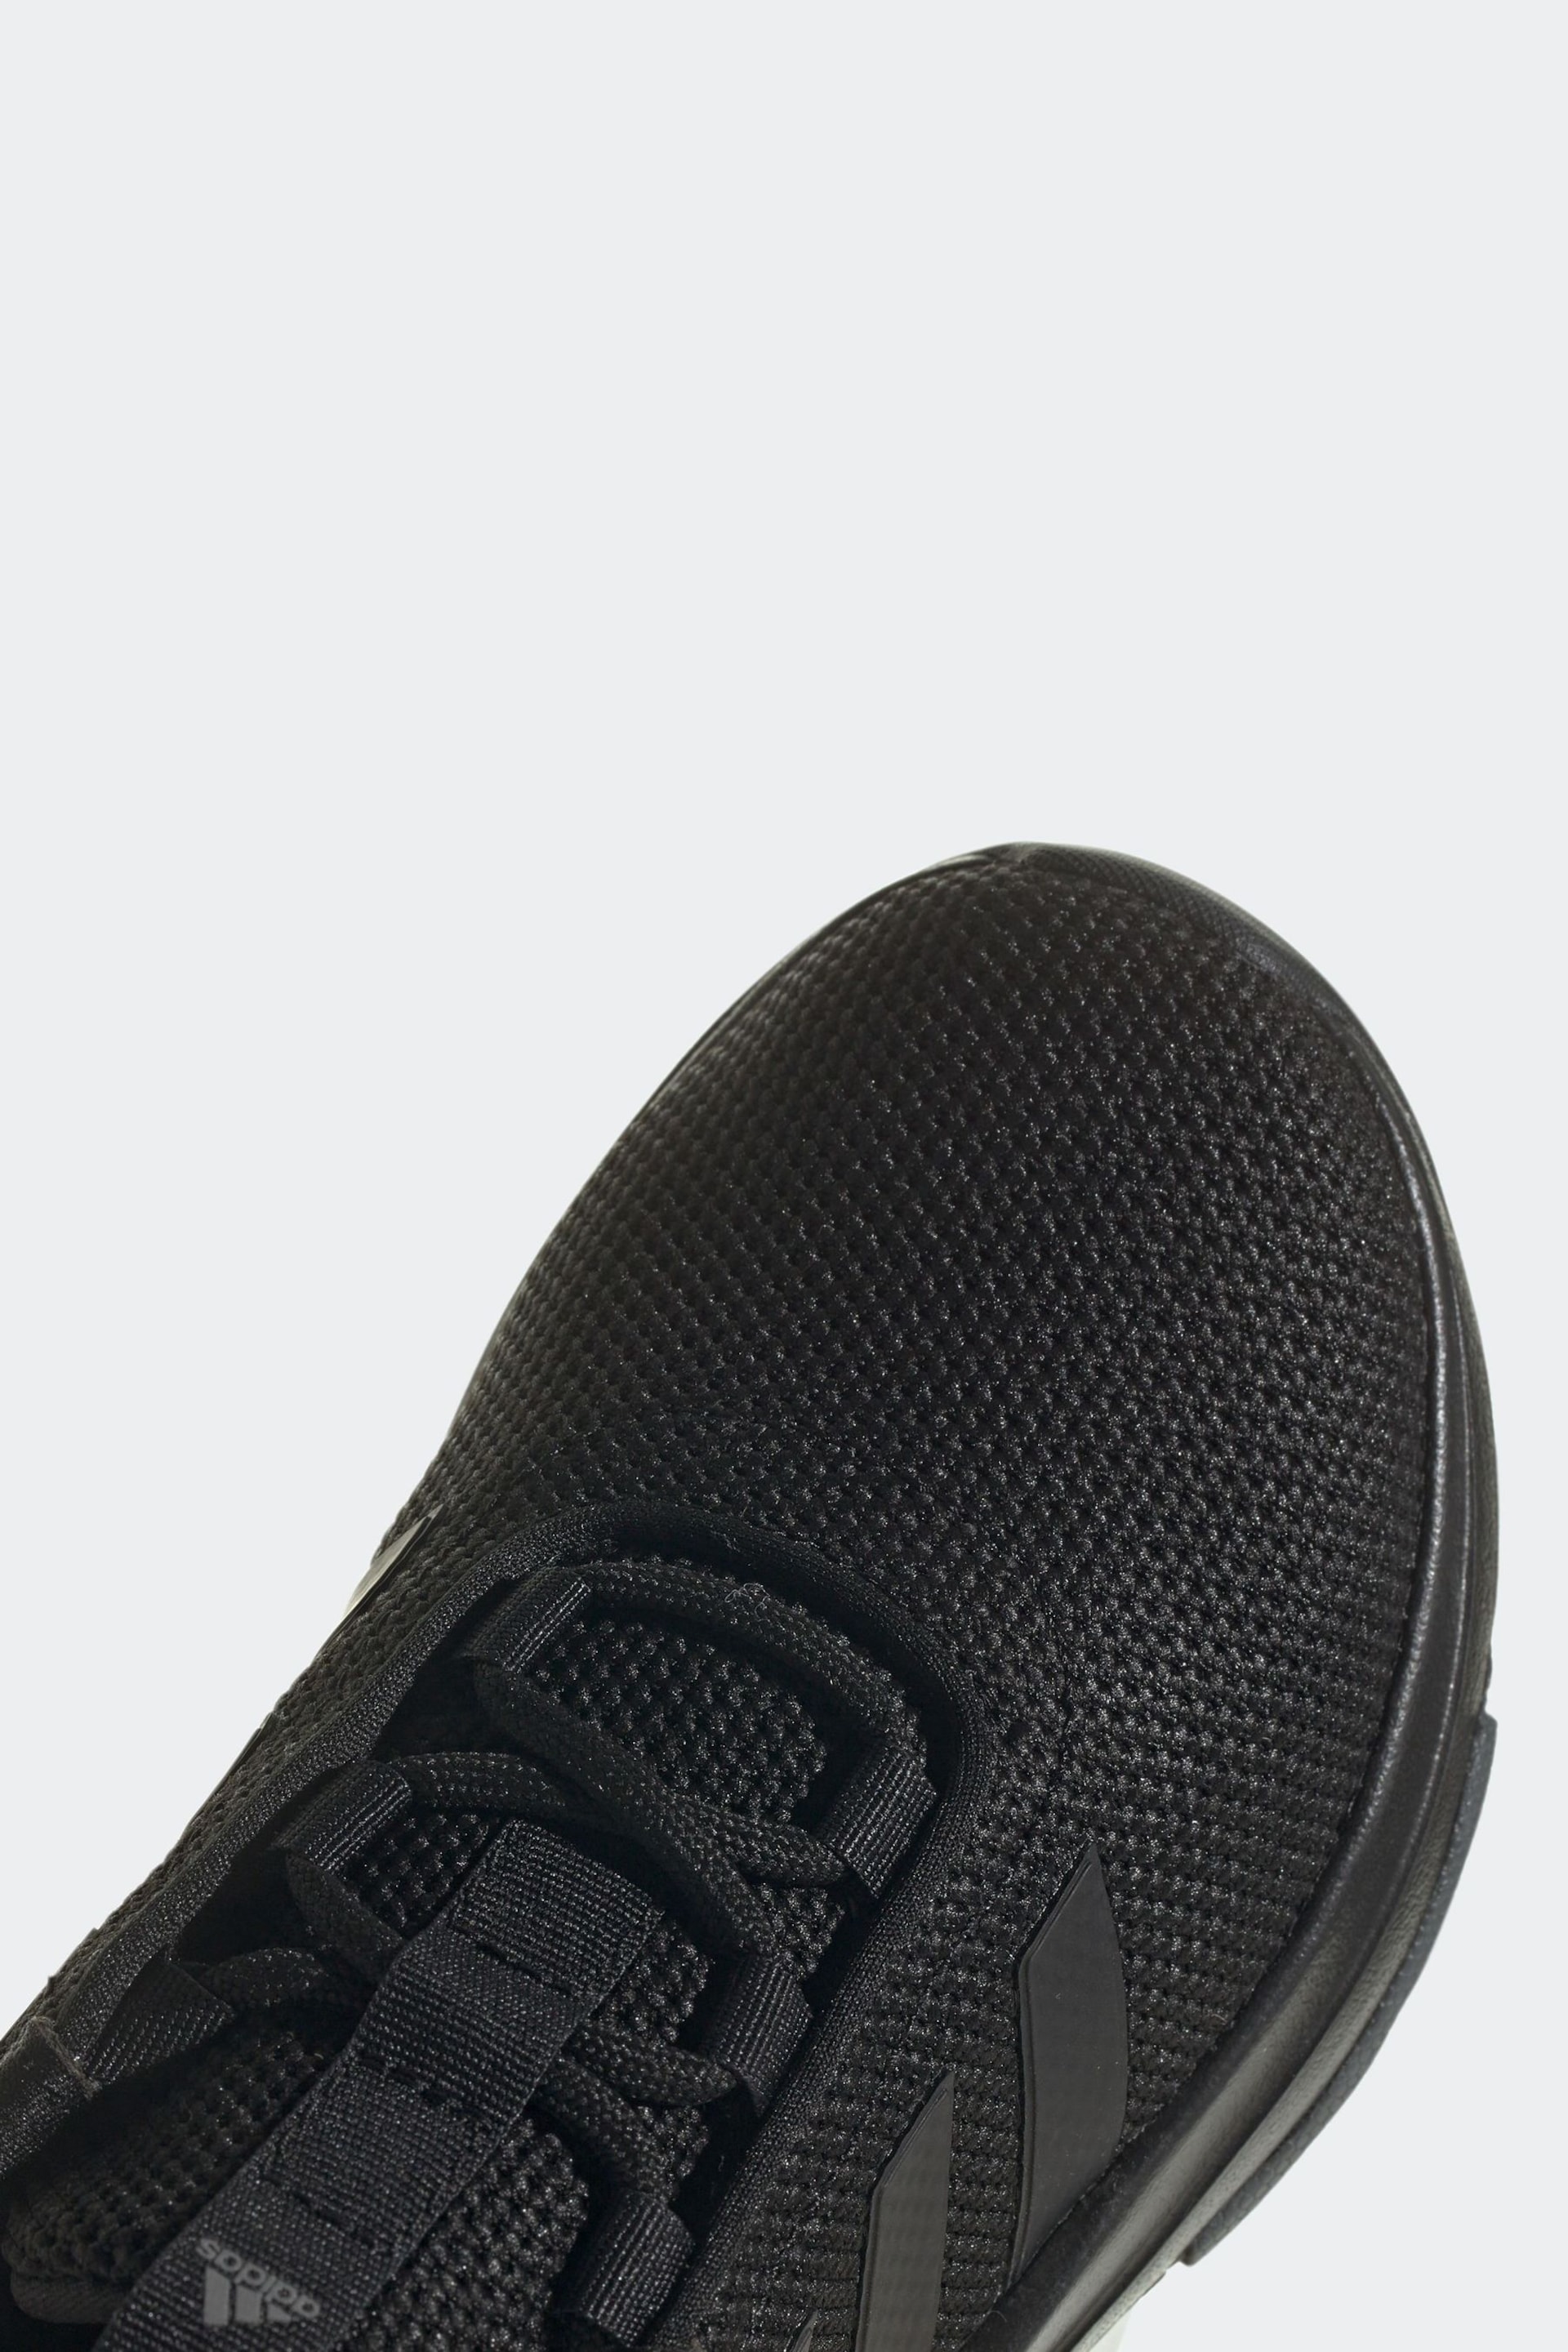 adidas Black Kids Racer TR23 Shoes - Image 8 of 8